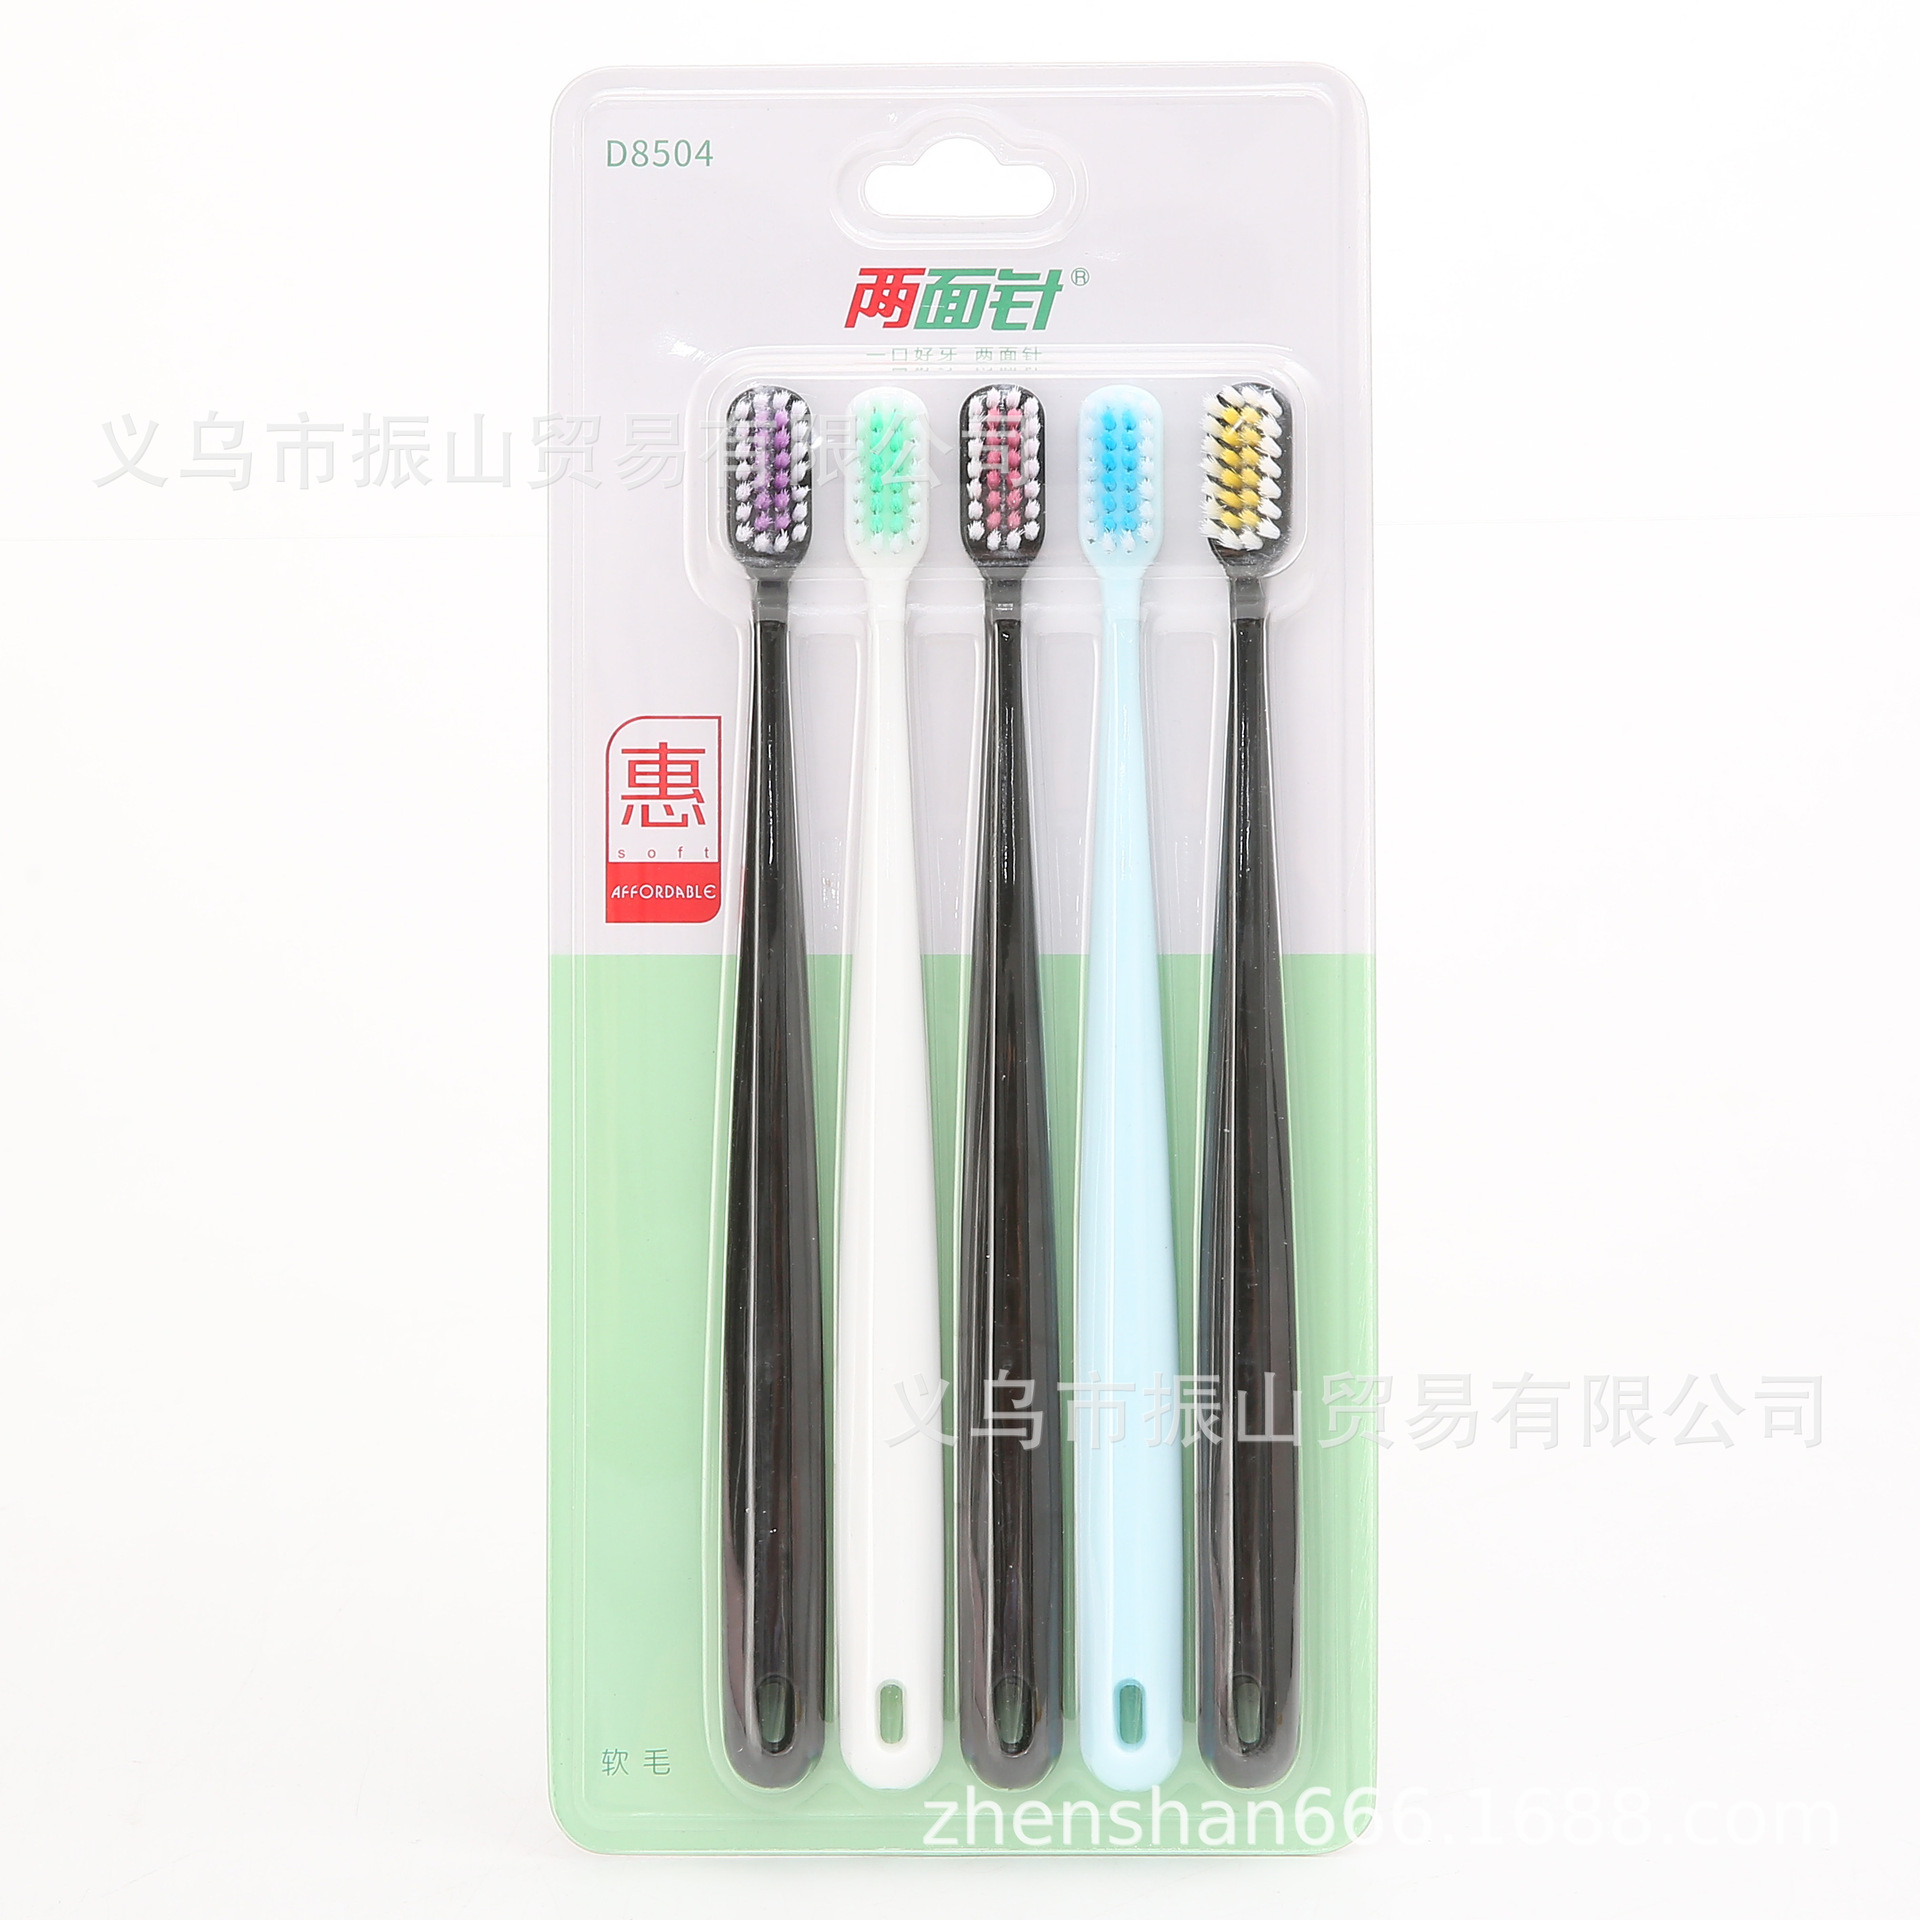 lmz8504 artistically made 5 mass sellers loaded smart brush head high density soft bristle toothbrush